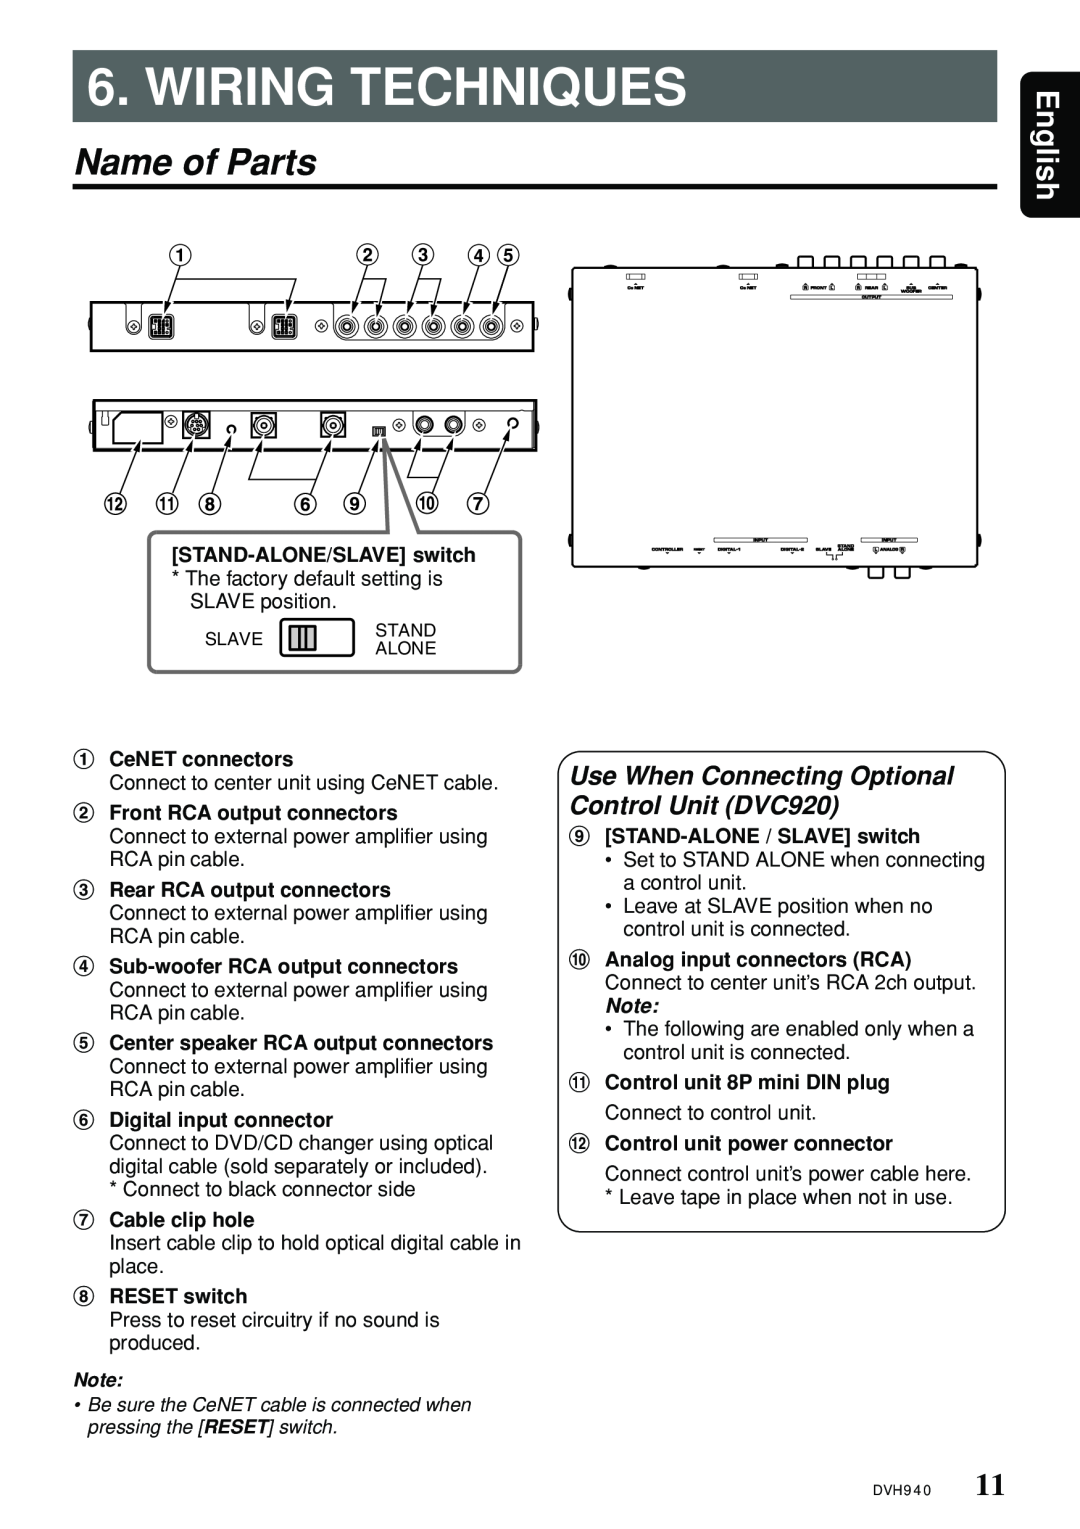 Clarion DVH940N owner manual Wiring Techniques, Name of Parts, English, Use When Connecting Optional Control Unit DVC920 